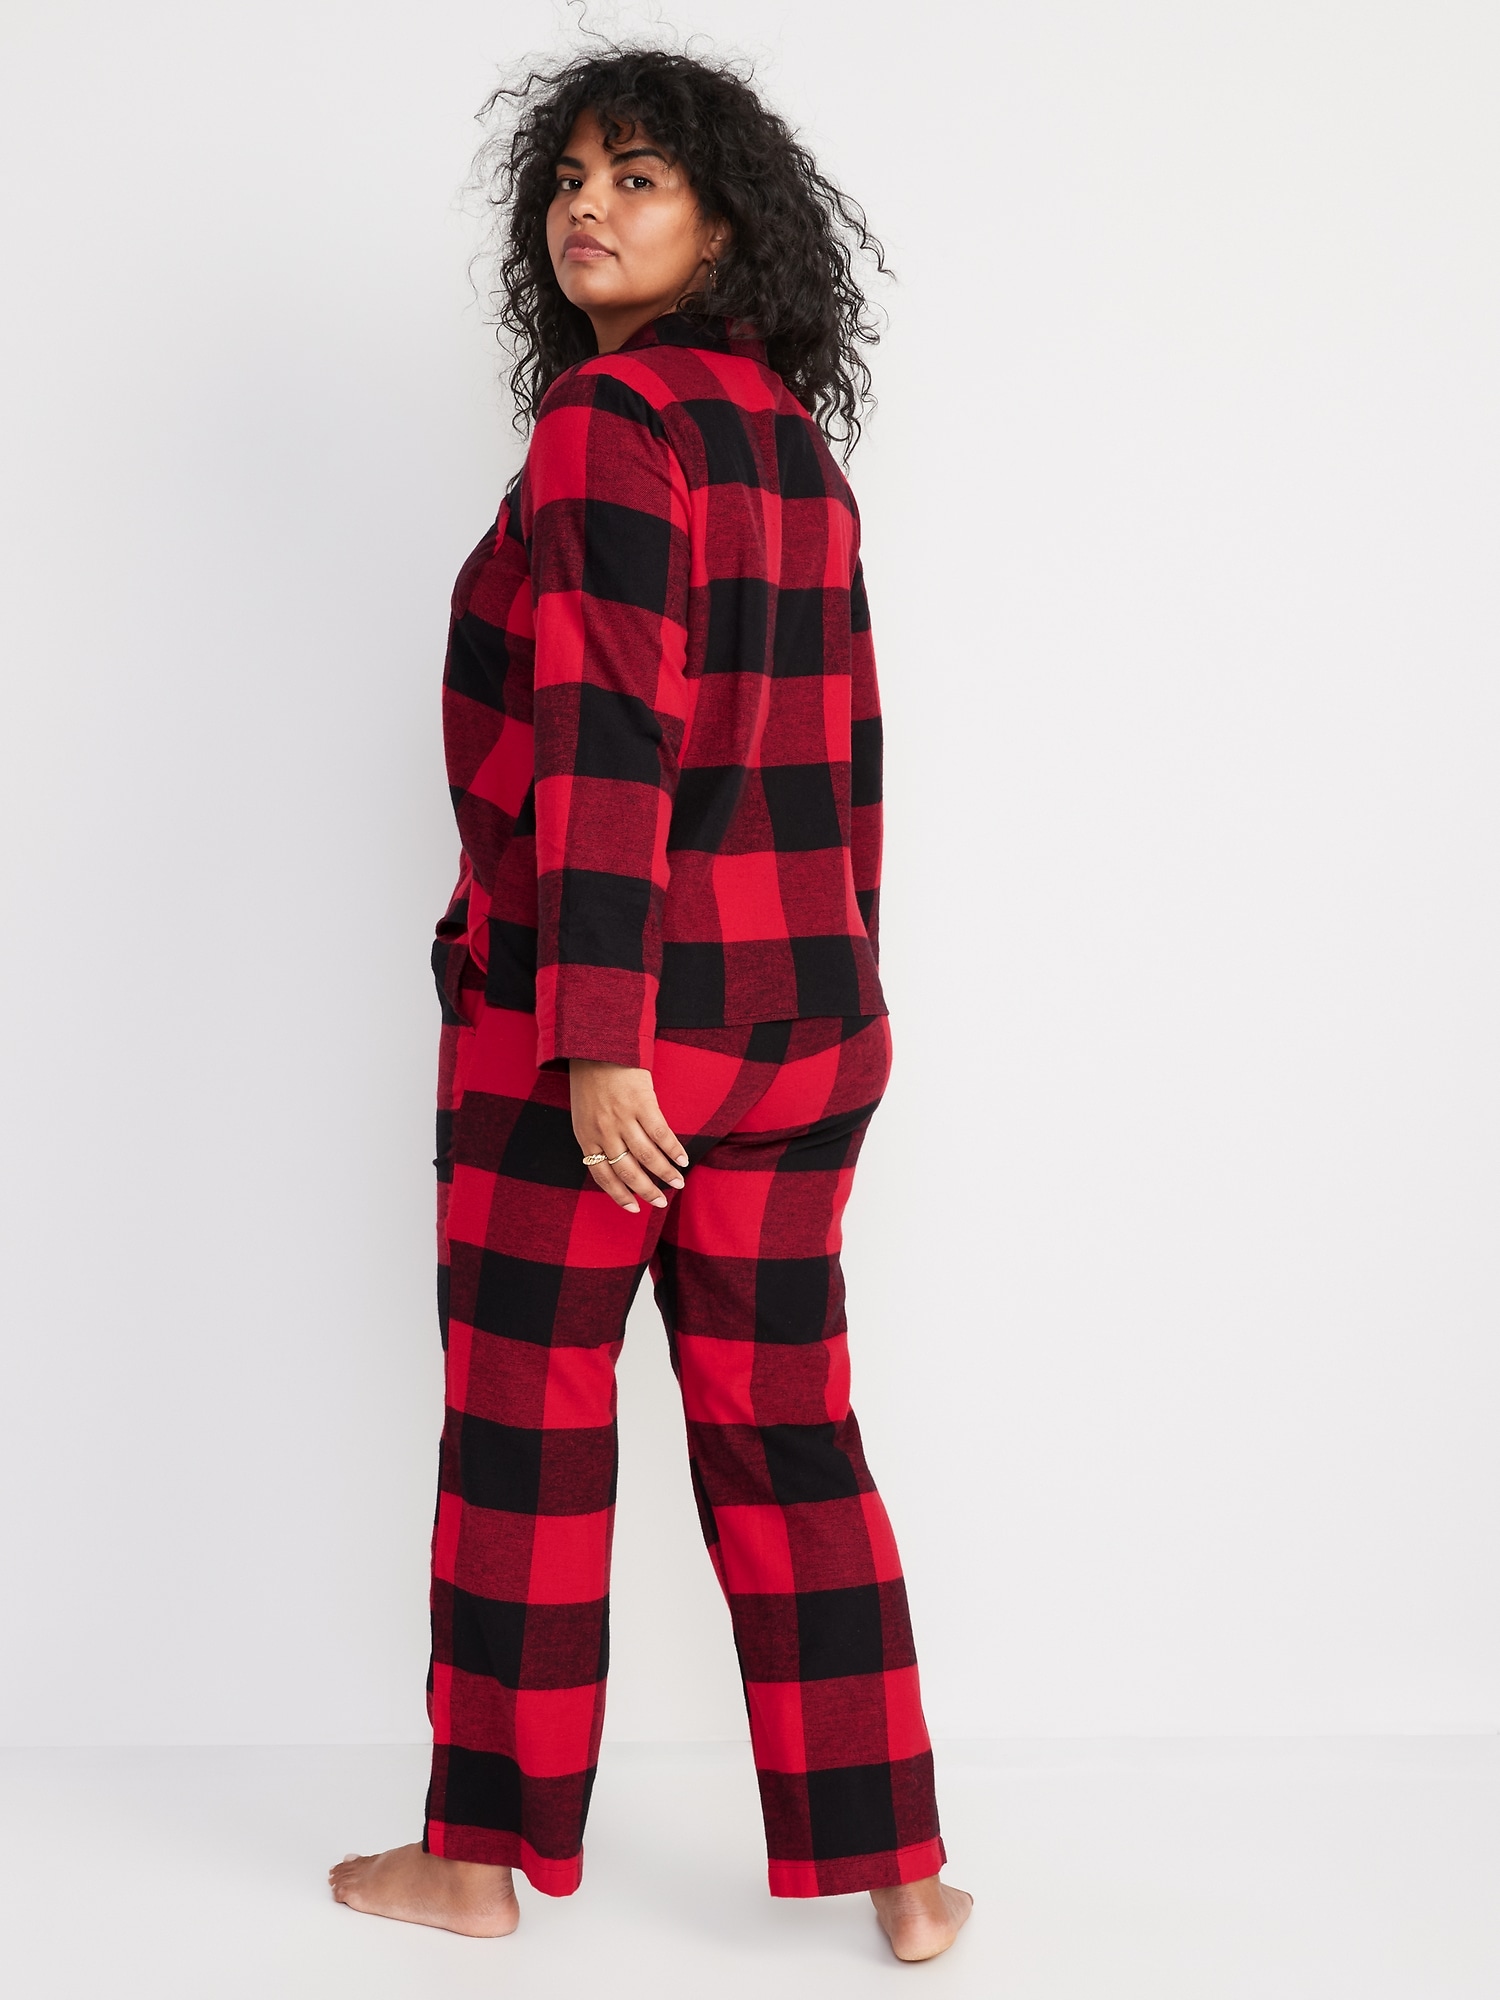 NWT Old Navy Patterned Flannel Sleep Pants Pajamas Red Buffalo Plaid Women  Small